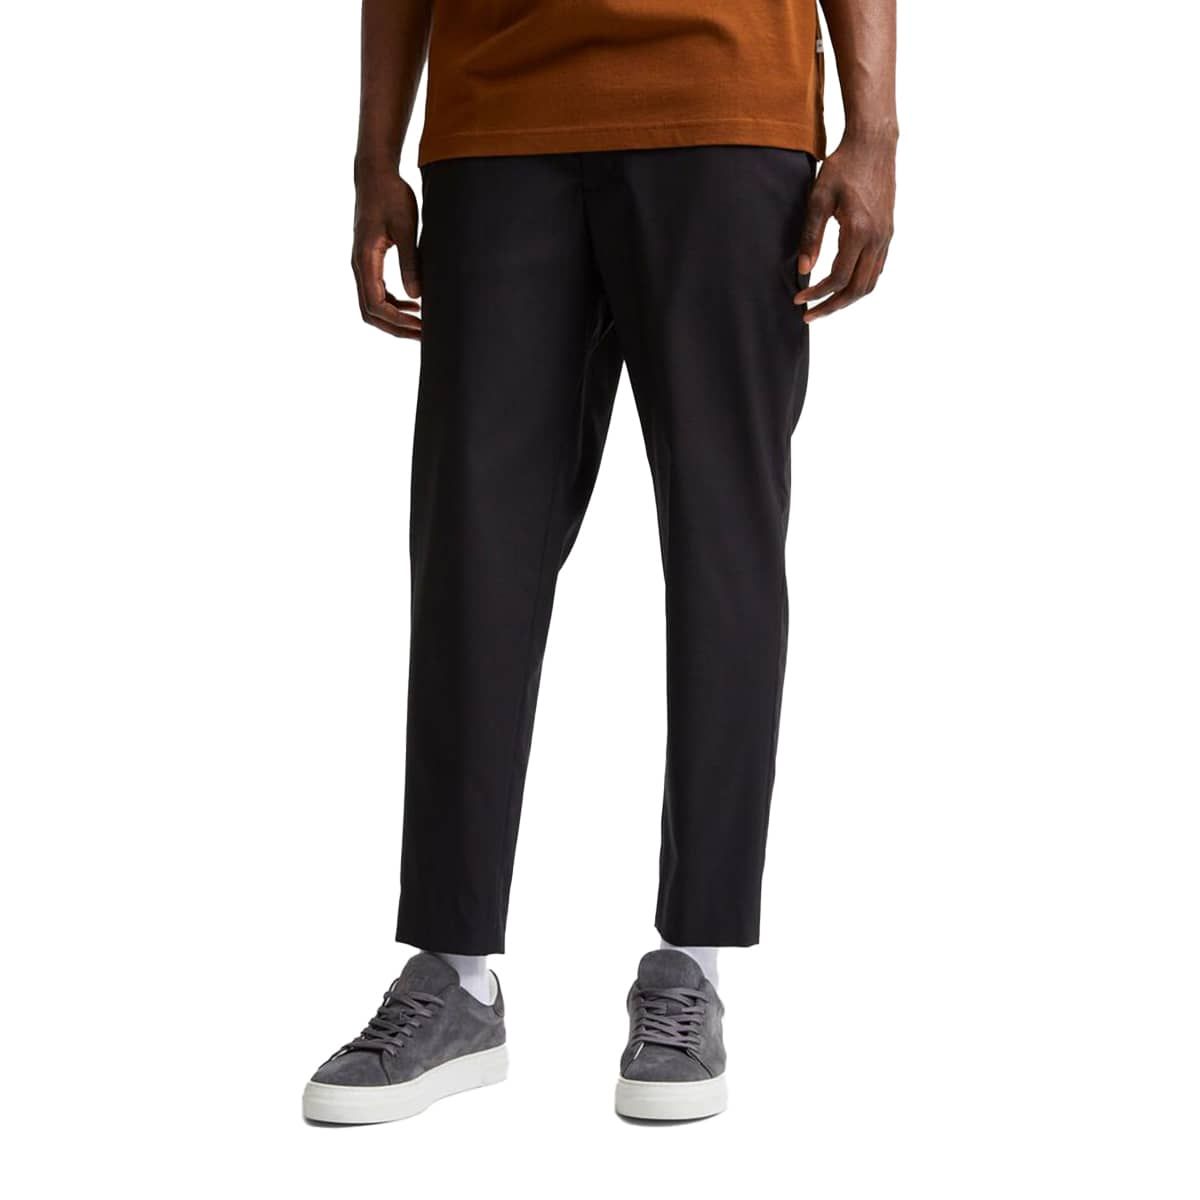 Black Ankle Performancce Trousers